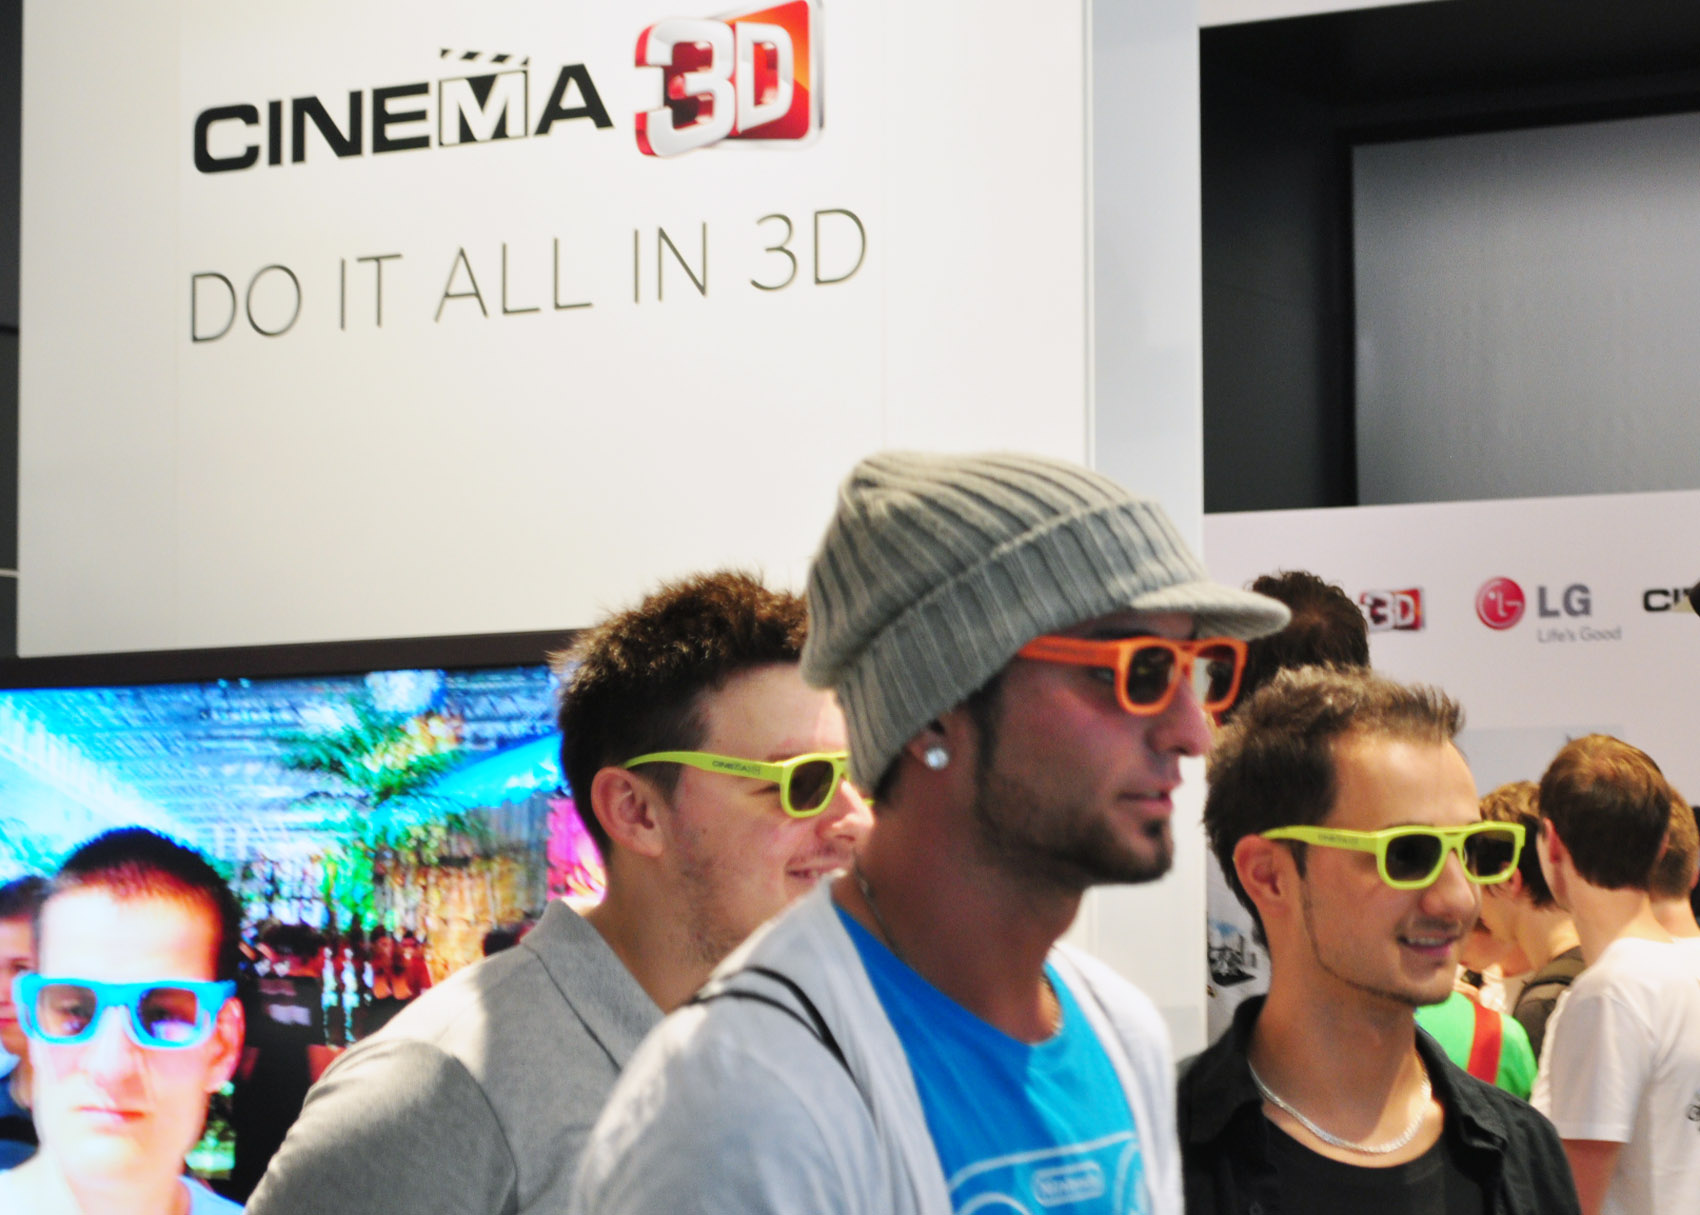 Three visitors wearing 3D glasses at the LG 3D Game Festival booth in Gamescom